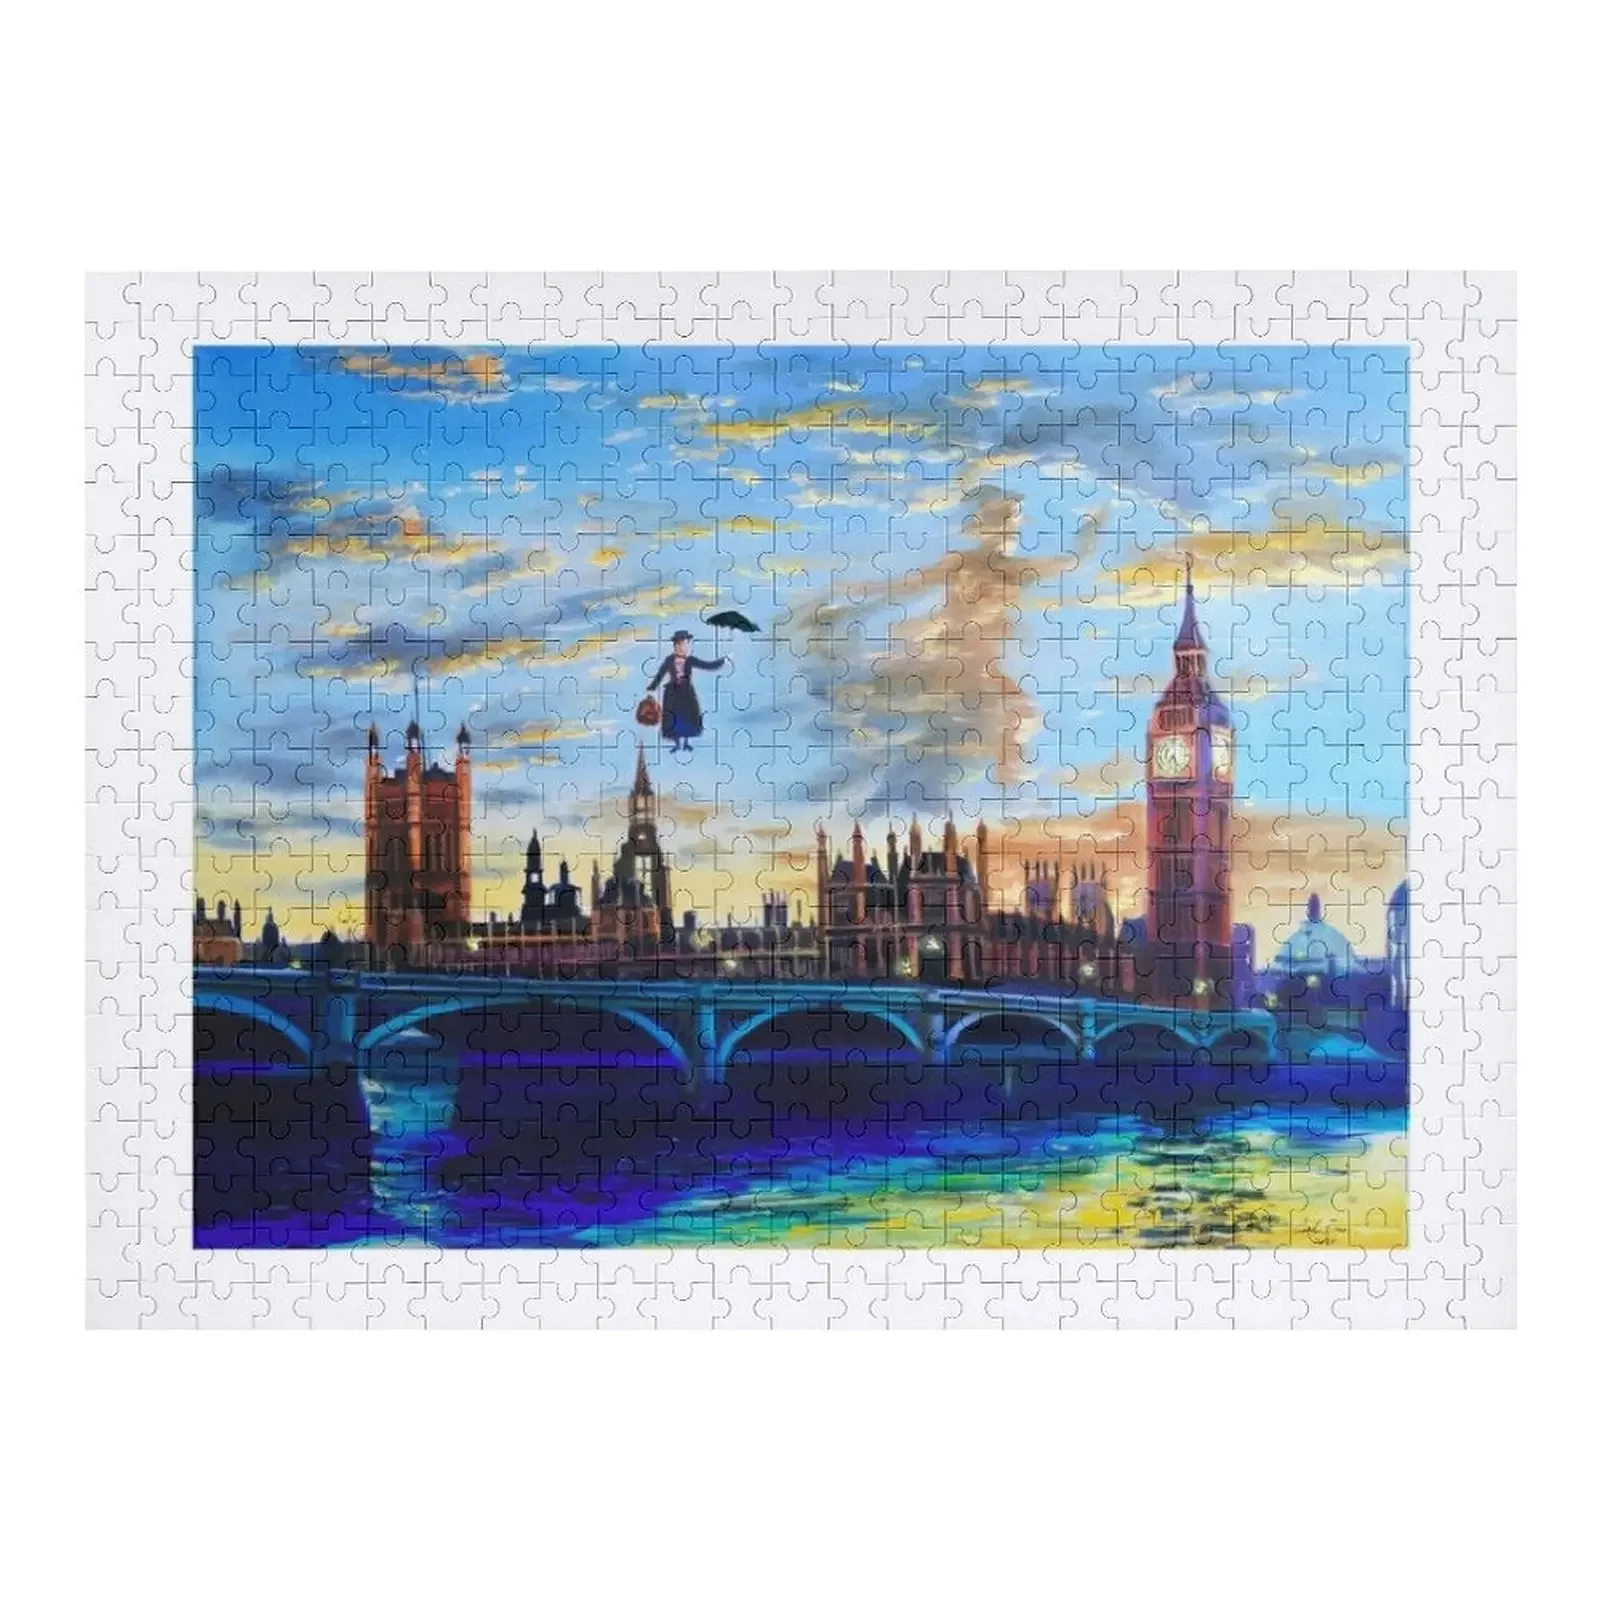 Mary Poppins returns to London Jigsaw Puzzle Diorama Accessories Toys For Children Personalized Gift Ideas Puzzle mary poppins i jigsaw puzzle anime animal puzzle